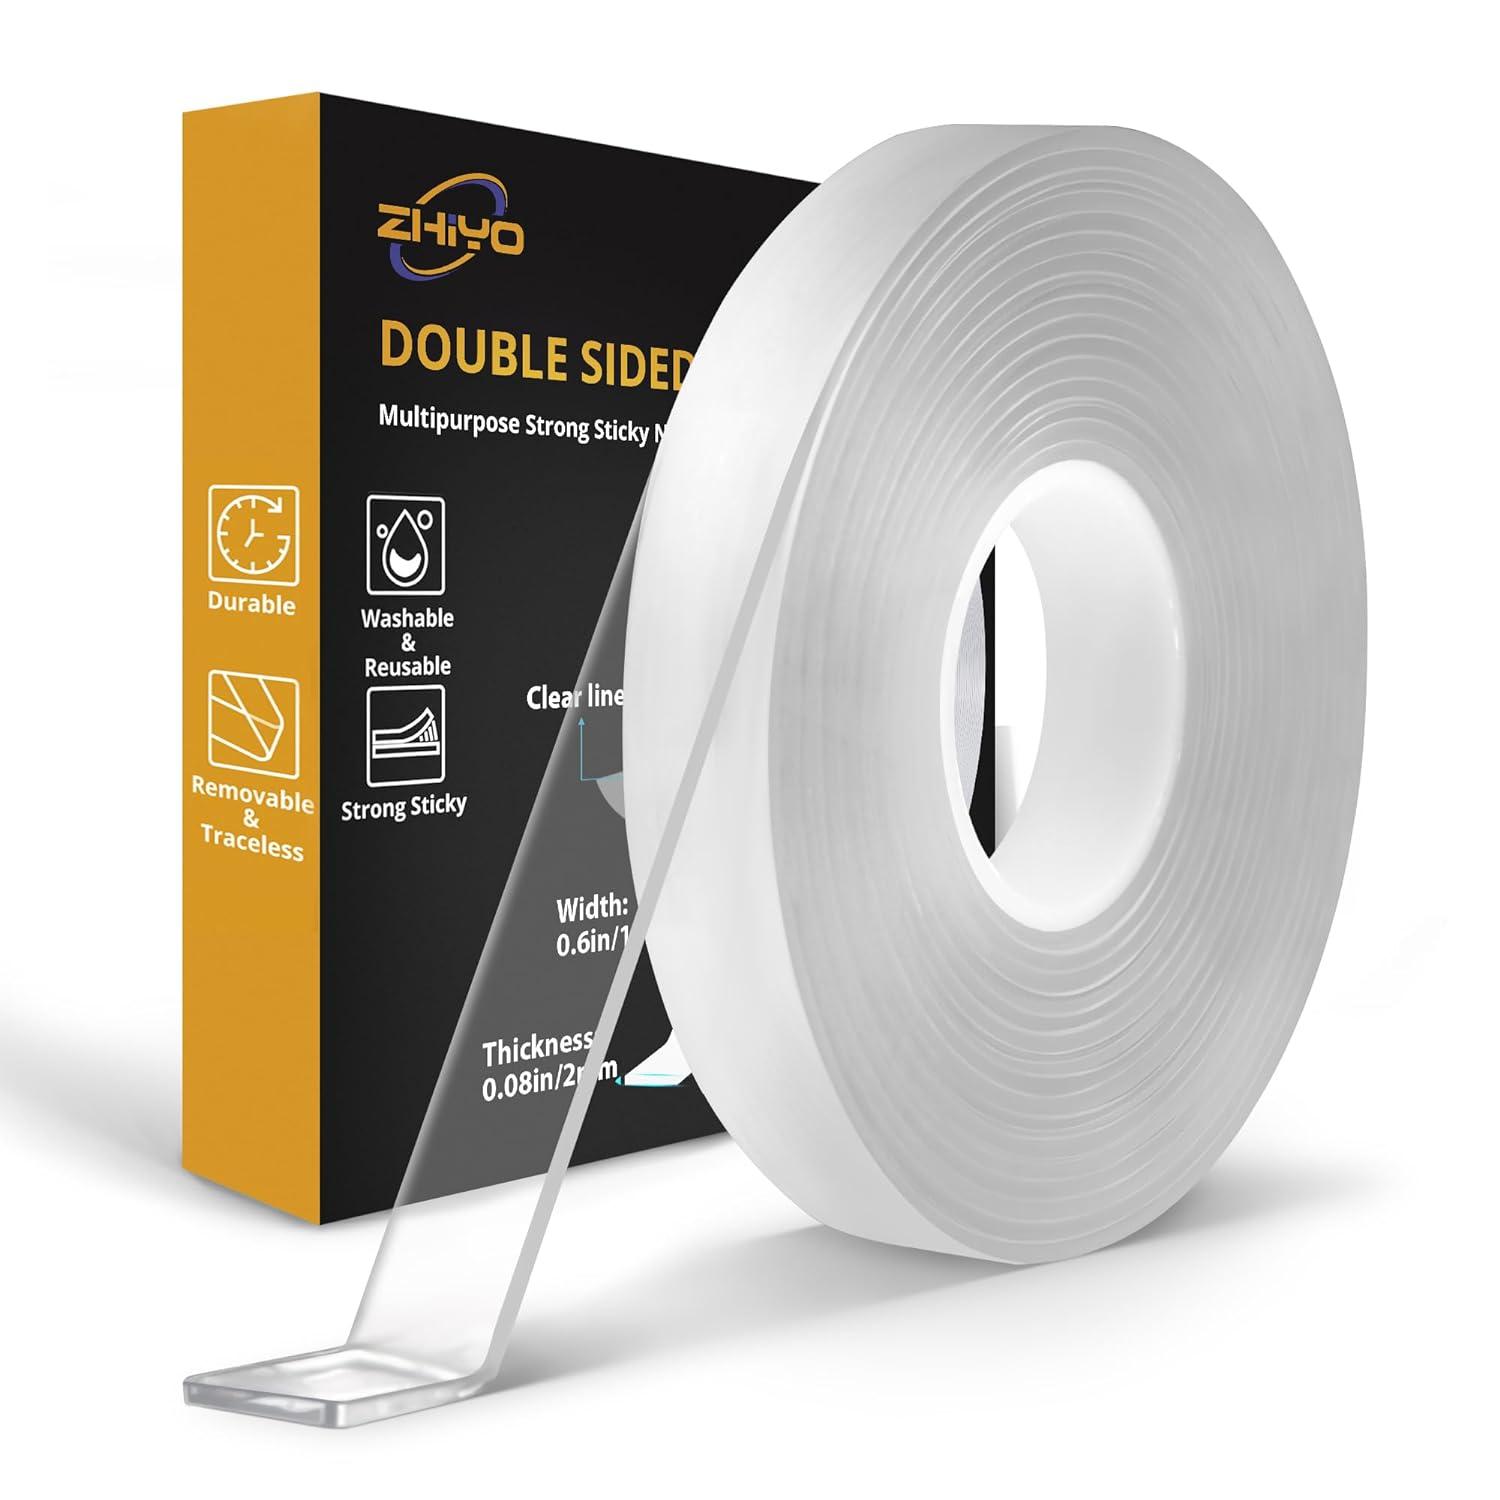 zhiyo double sided tape heavy duty 13 12 ft - thickened to 0 08 in strong sticky tape multipurpose nano tape